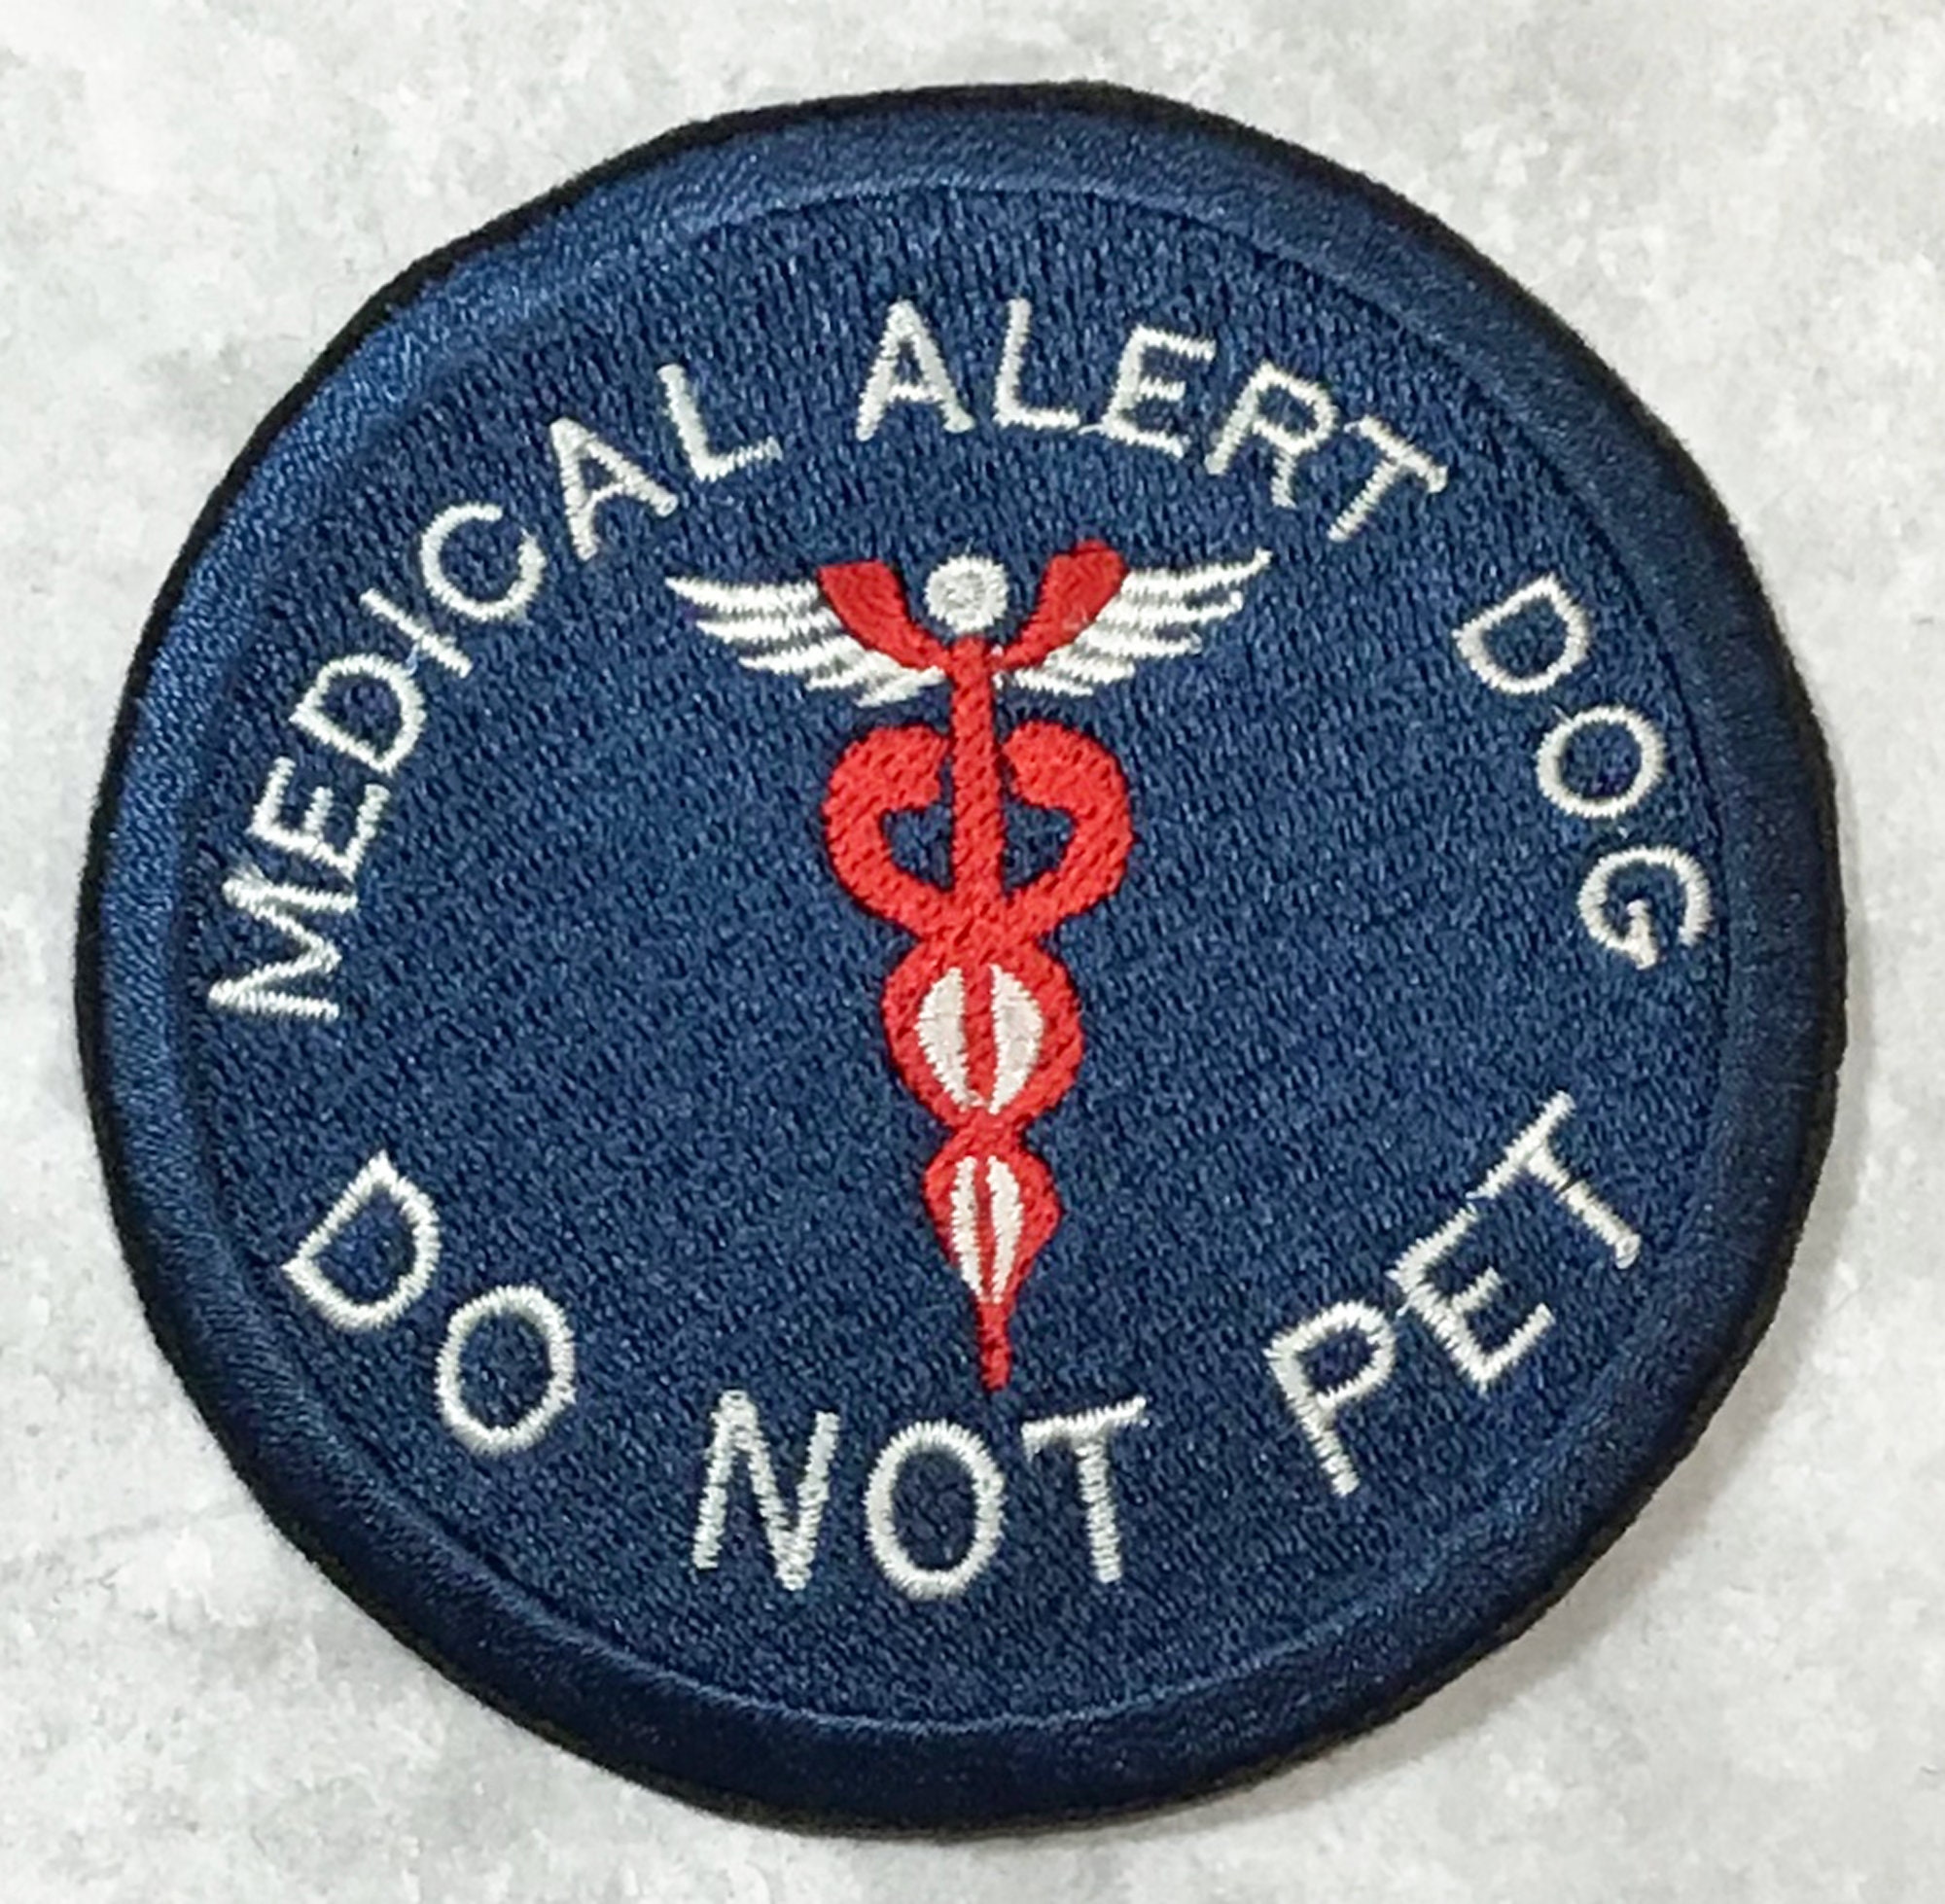 Medical Alert Patch – Show Your Teal